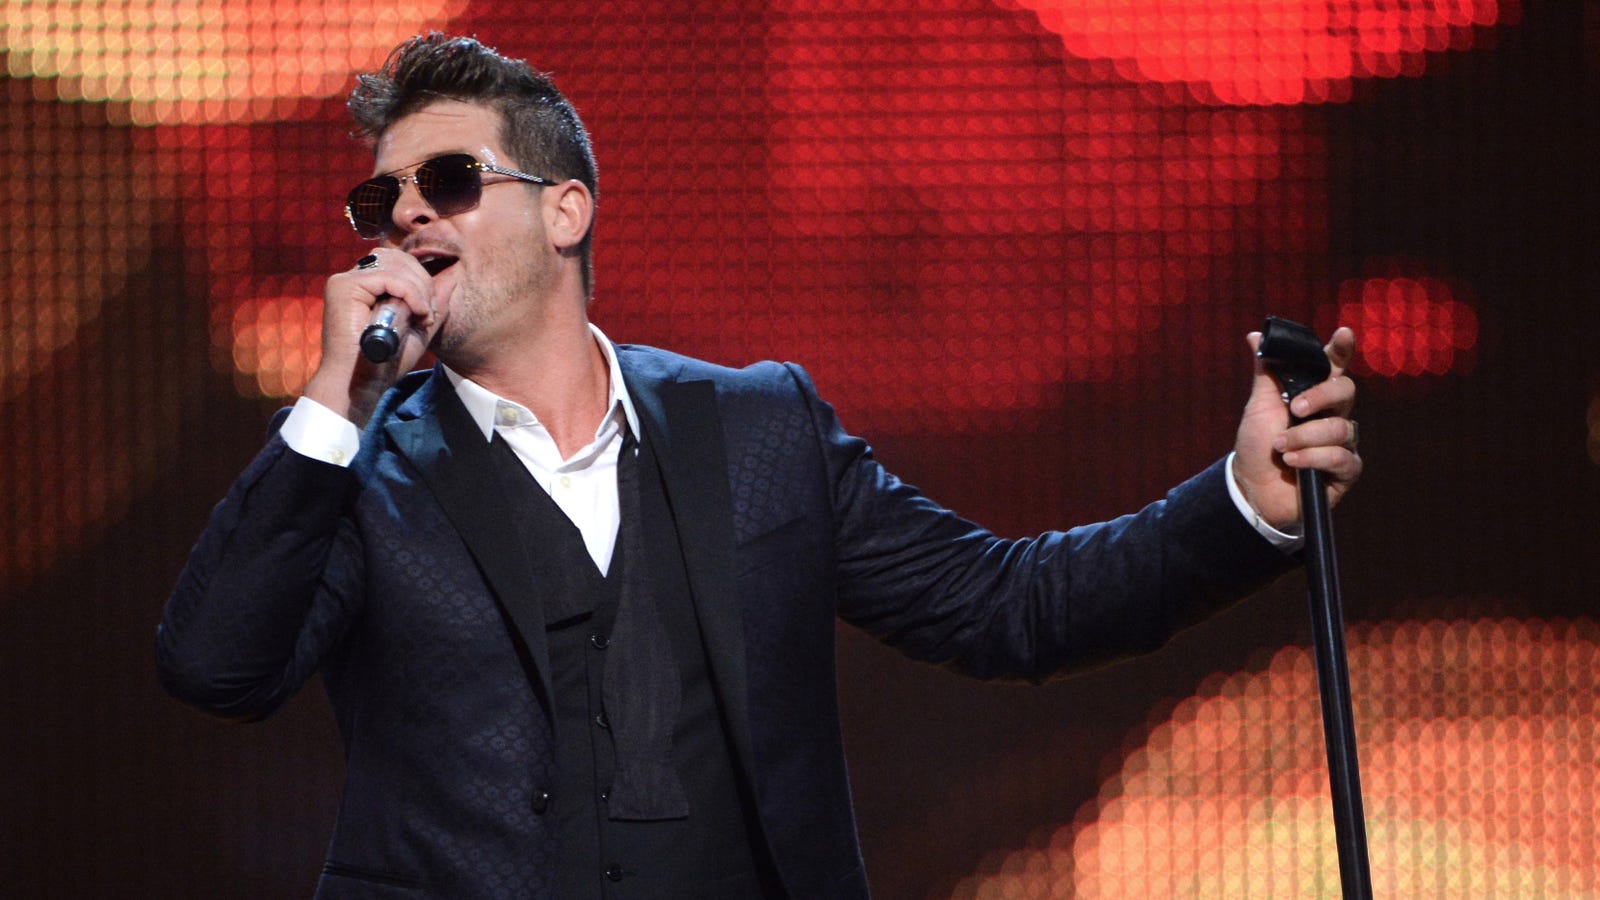 Robin Thicke and Pharrell Williams Are Appealing Their 'Blurred Lines' Copyright Loss